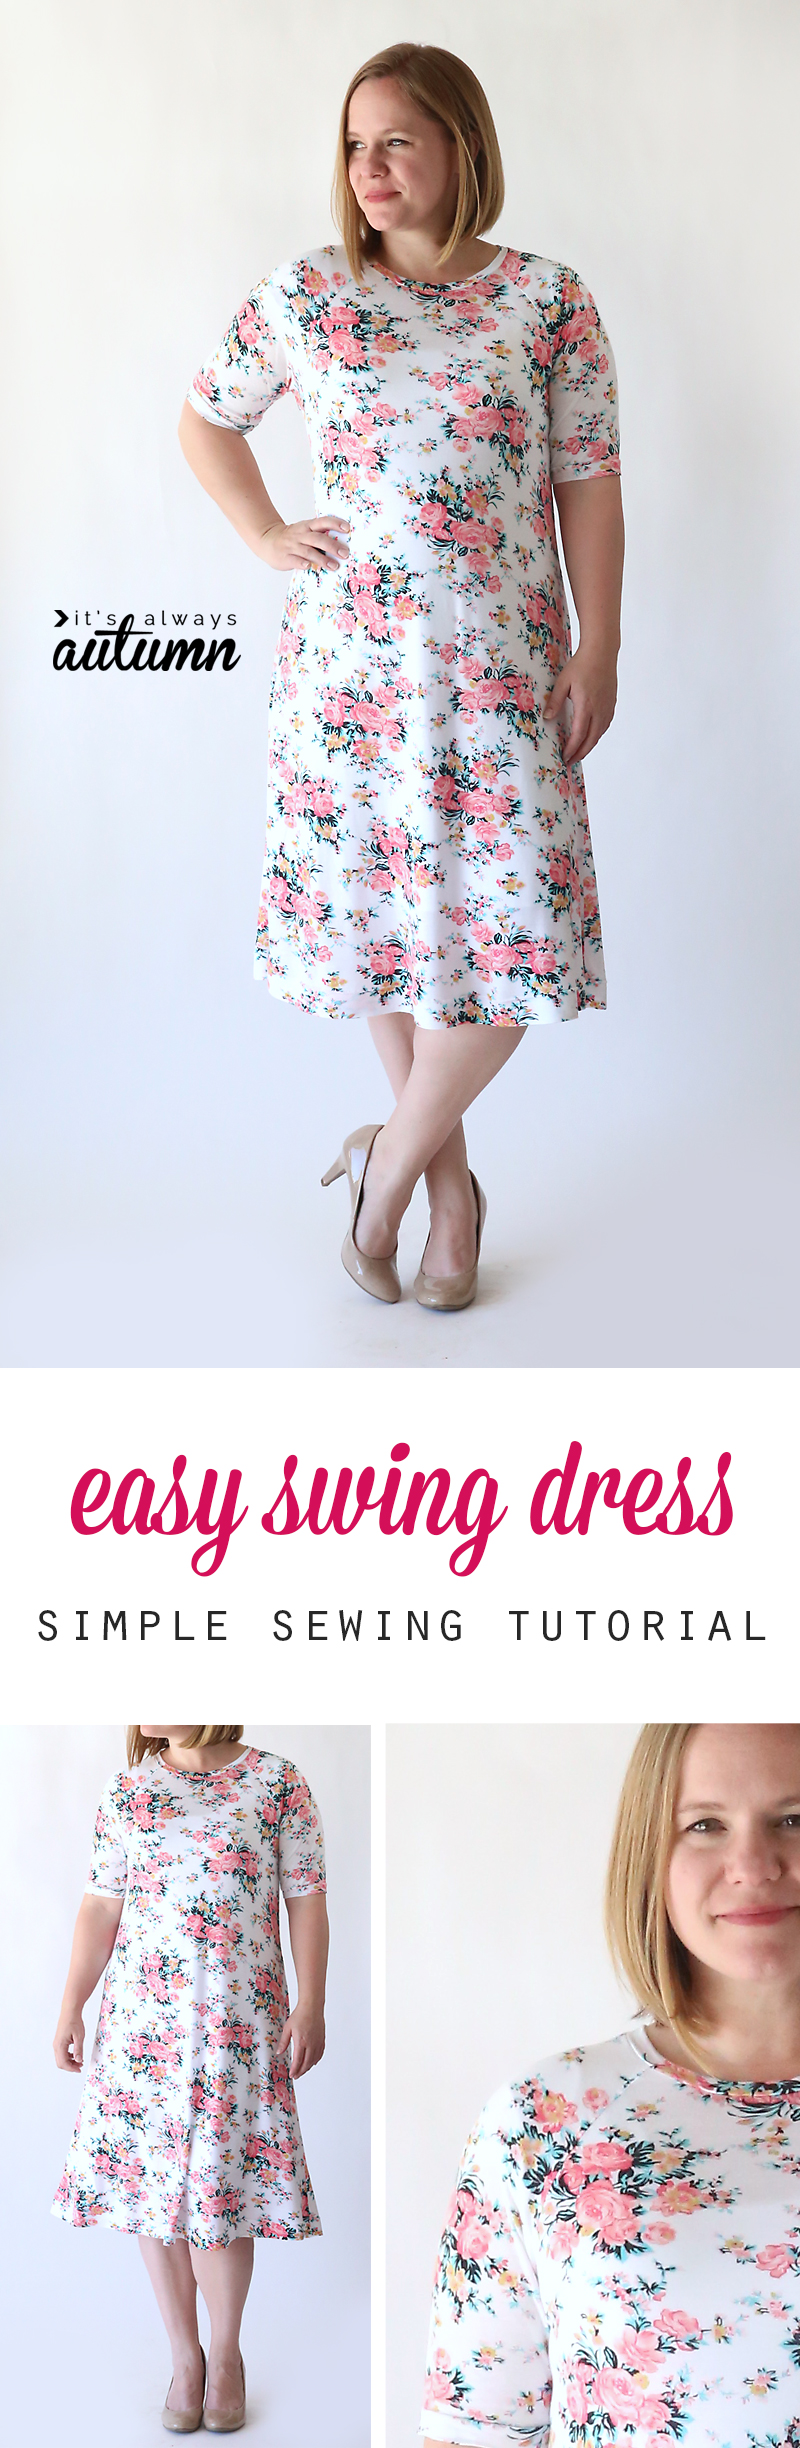 A girl in a floral swing dress made from a sewing tutorial